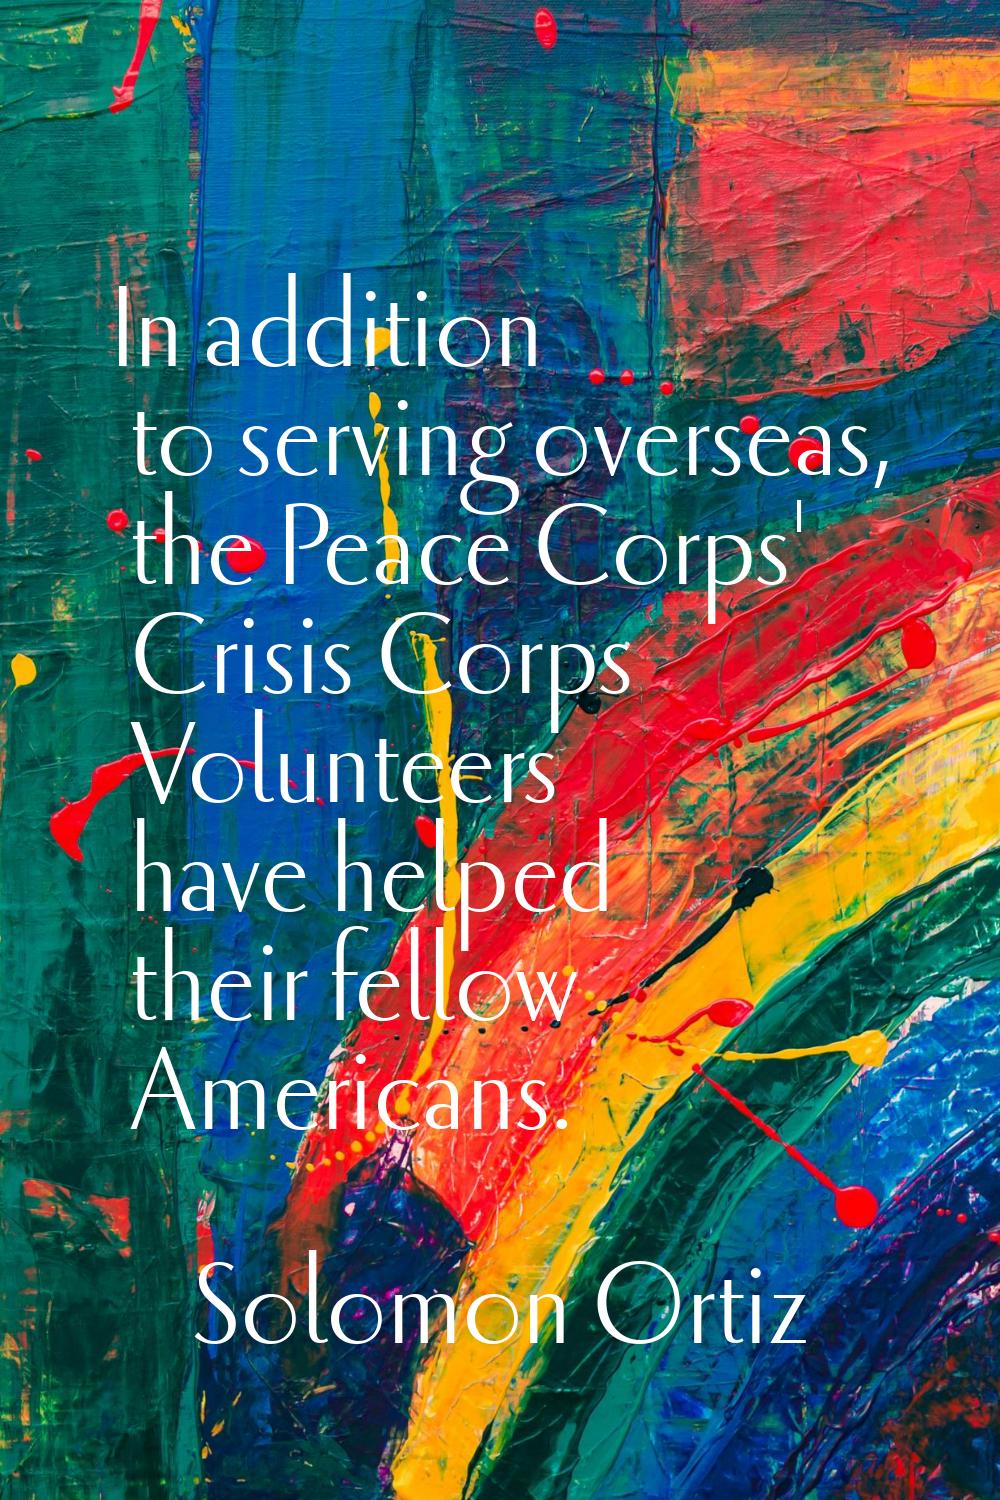 In addition to serving overseas, the Peace Corps' Crisis Corps Volunteers have helped their fellow 